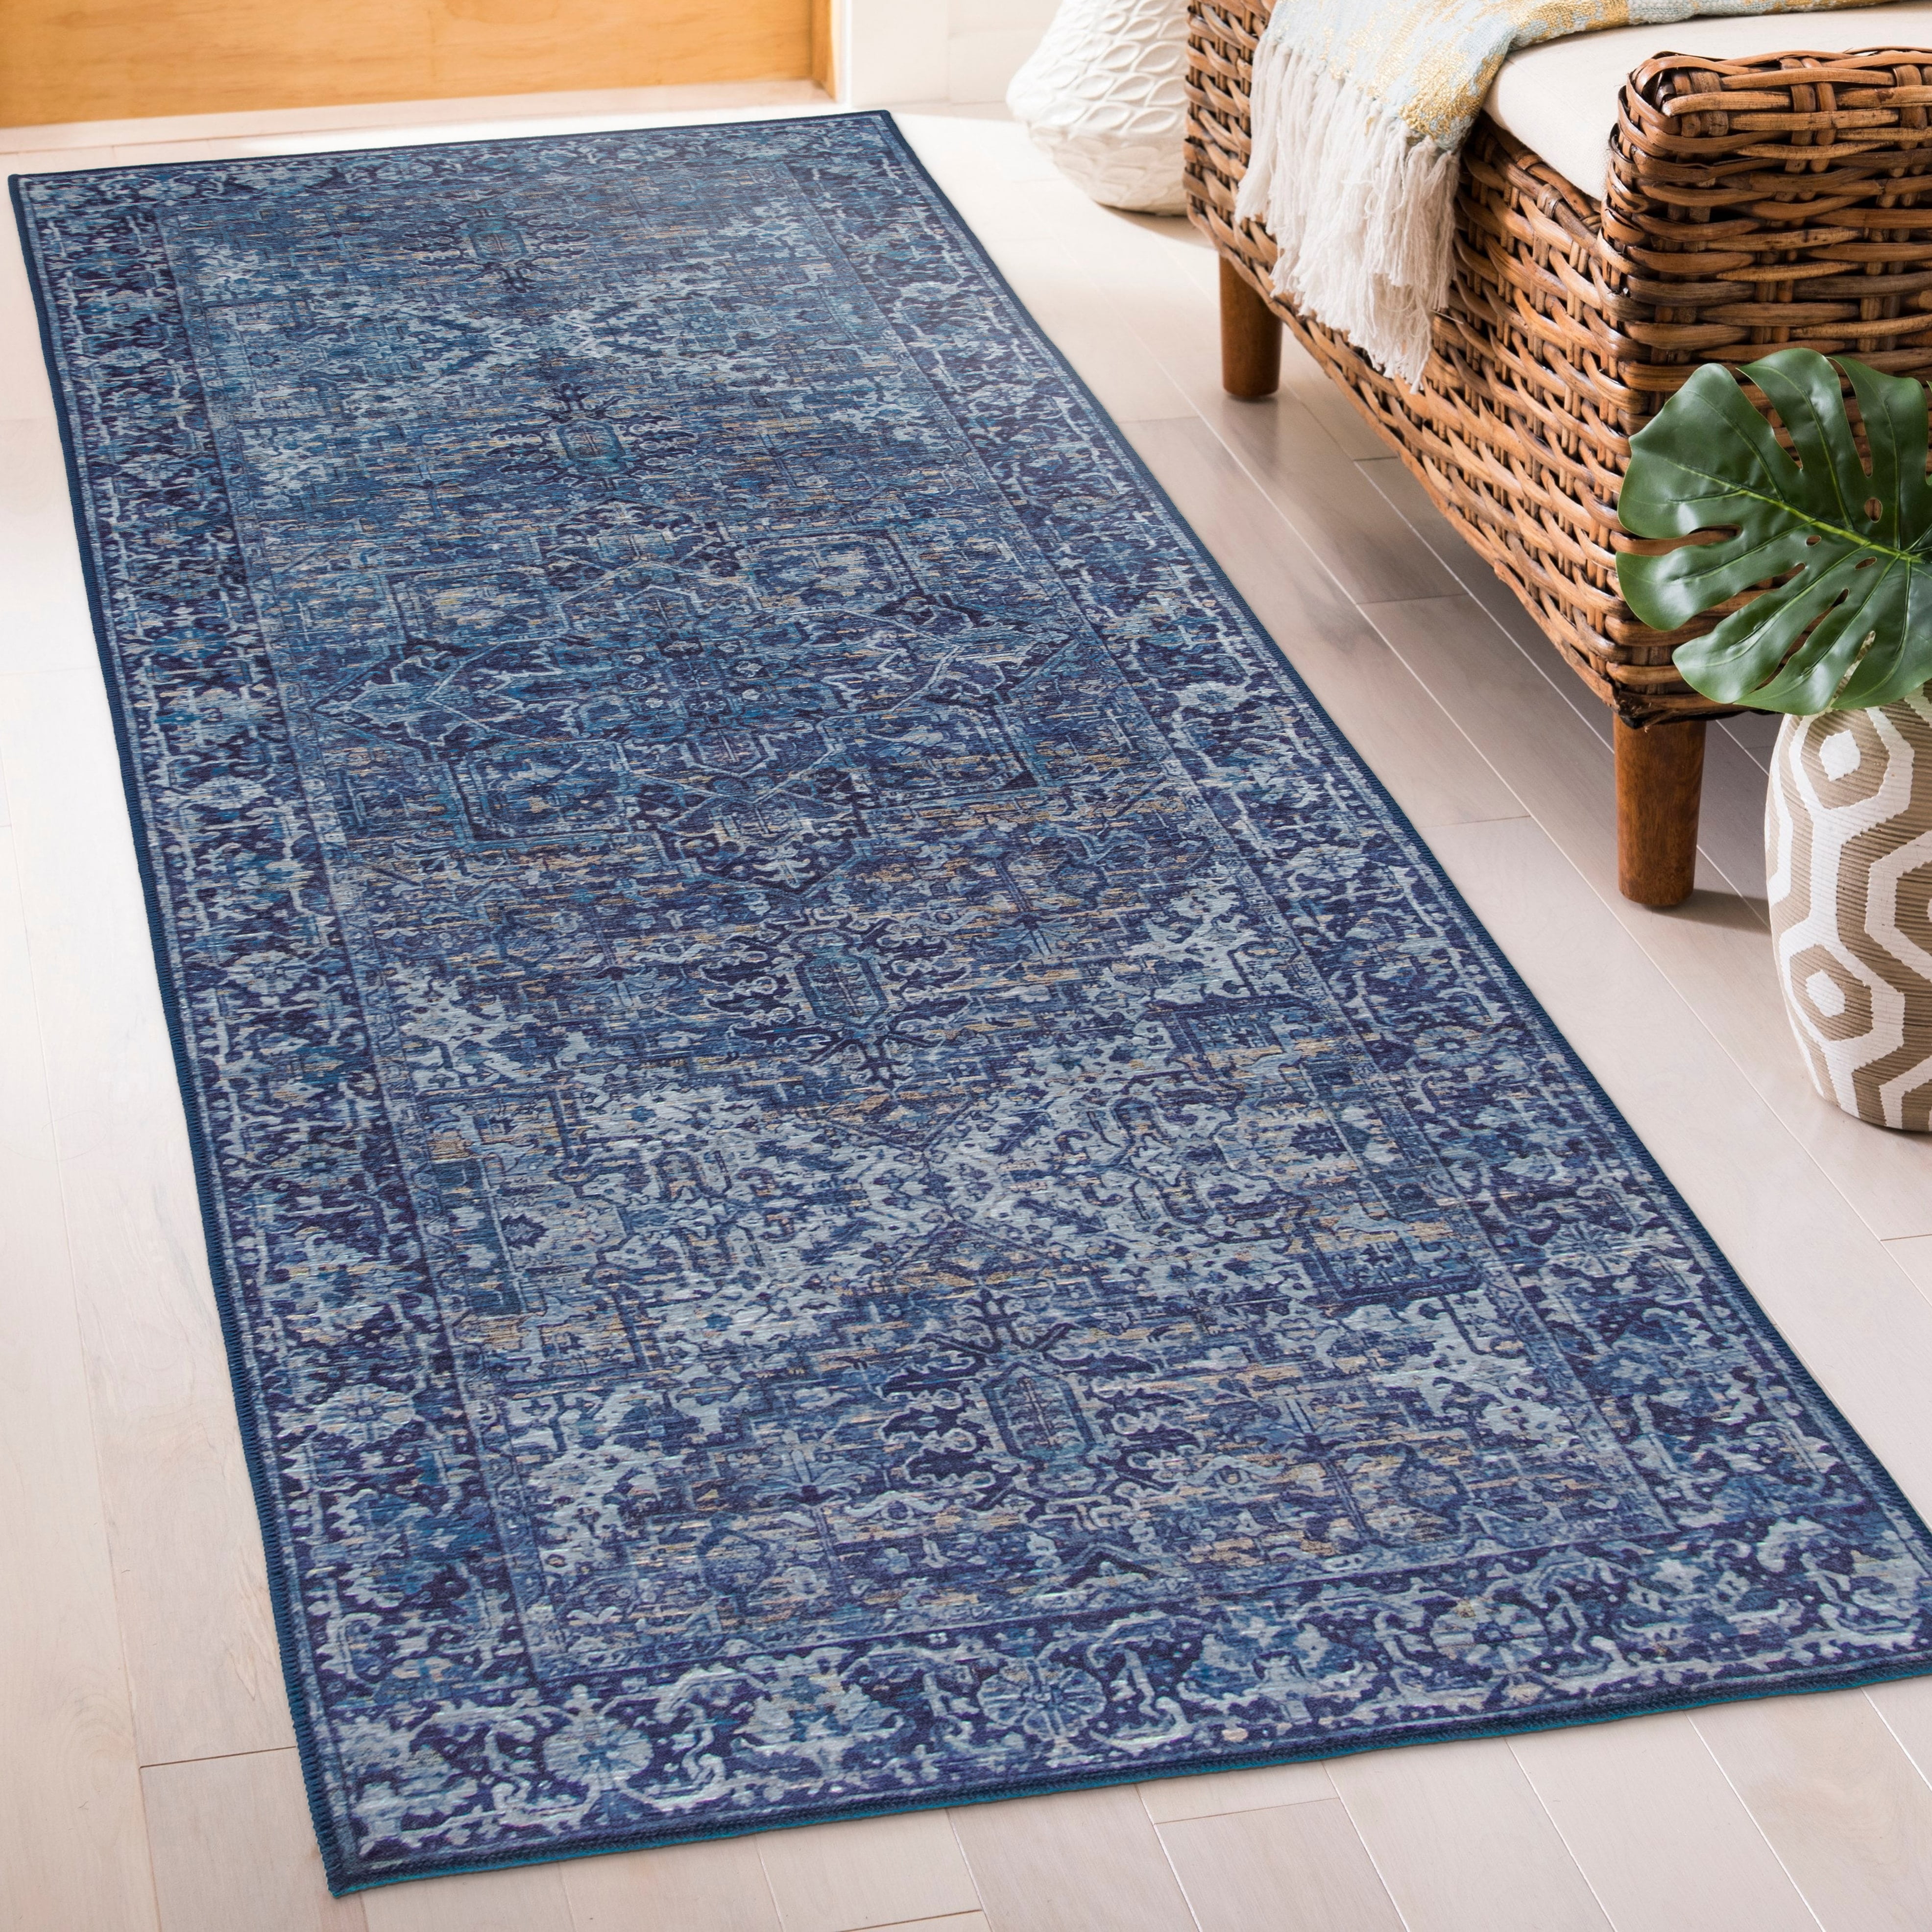 Classic Traditional Rugs for Living Room Distressed Zero Pile Flat Carpet Runner 